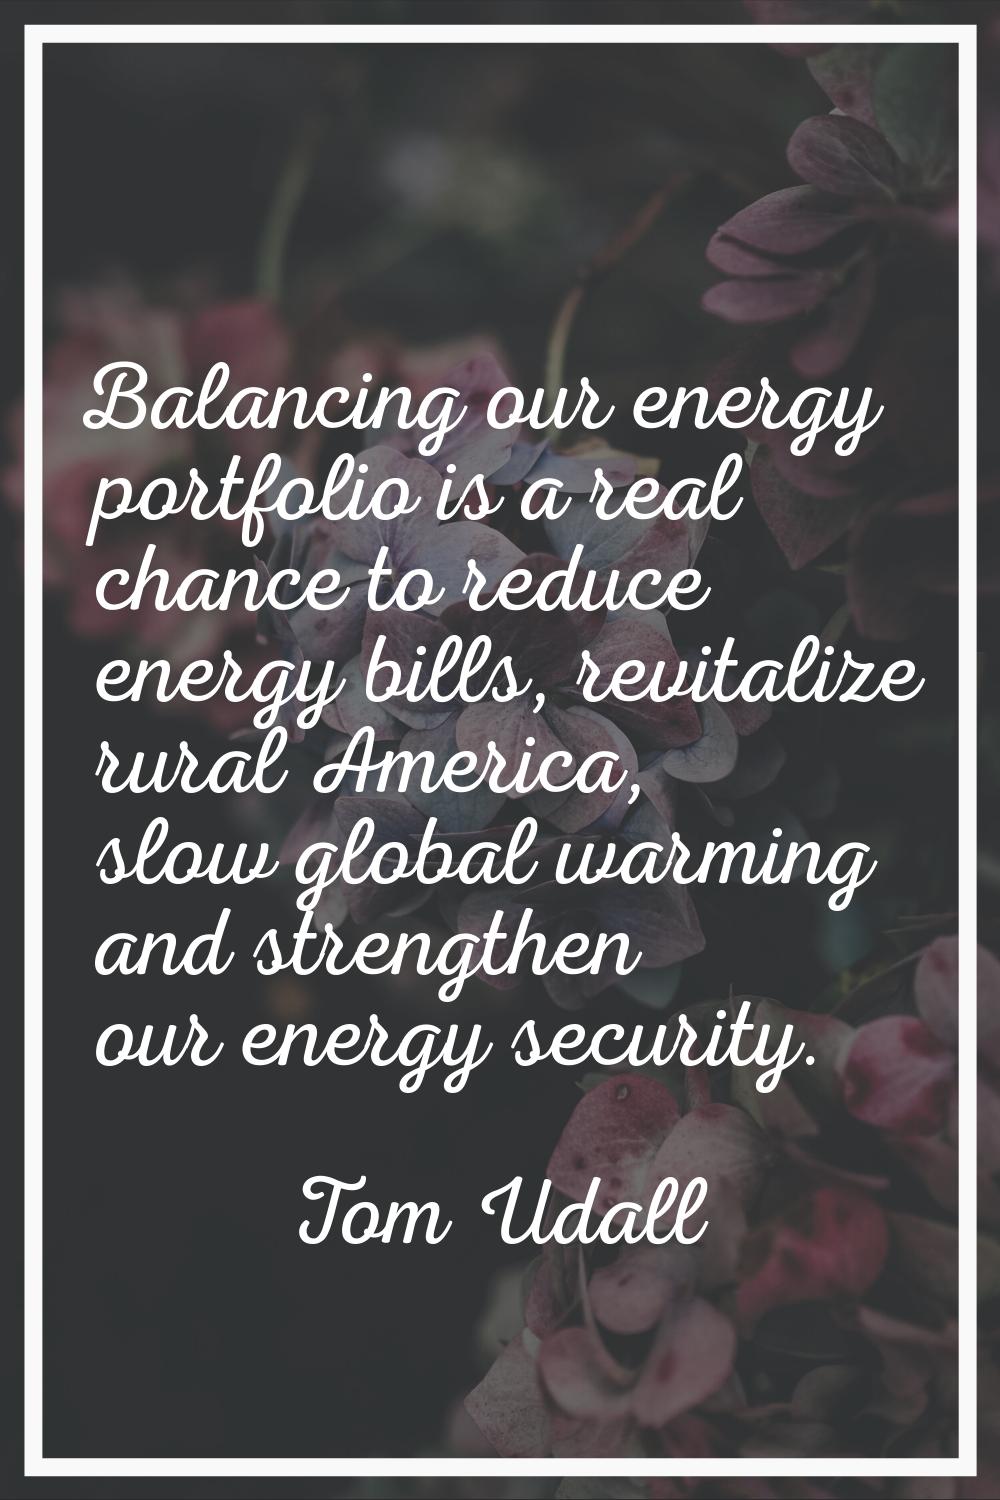 Balancing our energy portfolio is a real chance to reduce energy bills, revitalize rural America, s